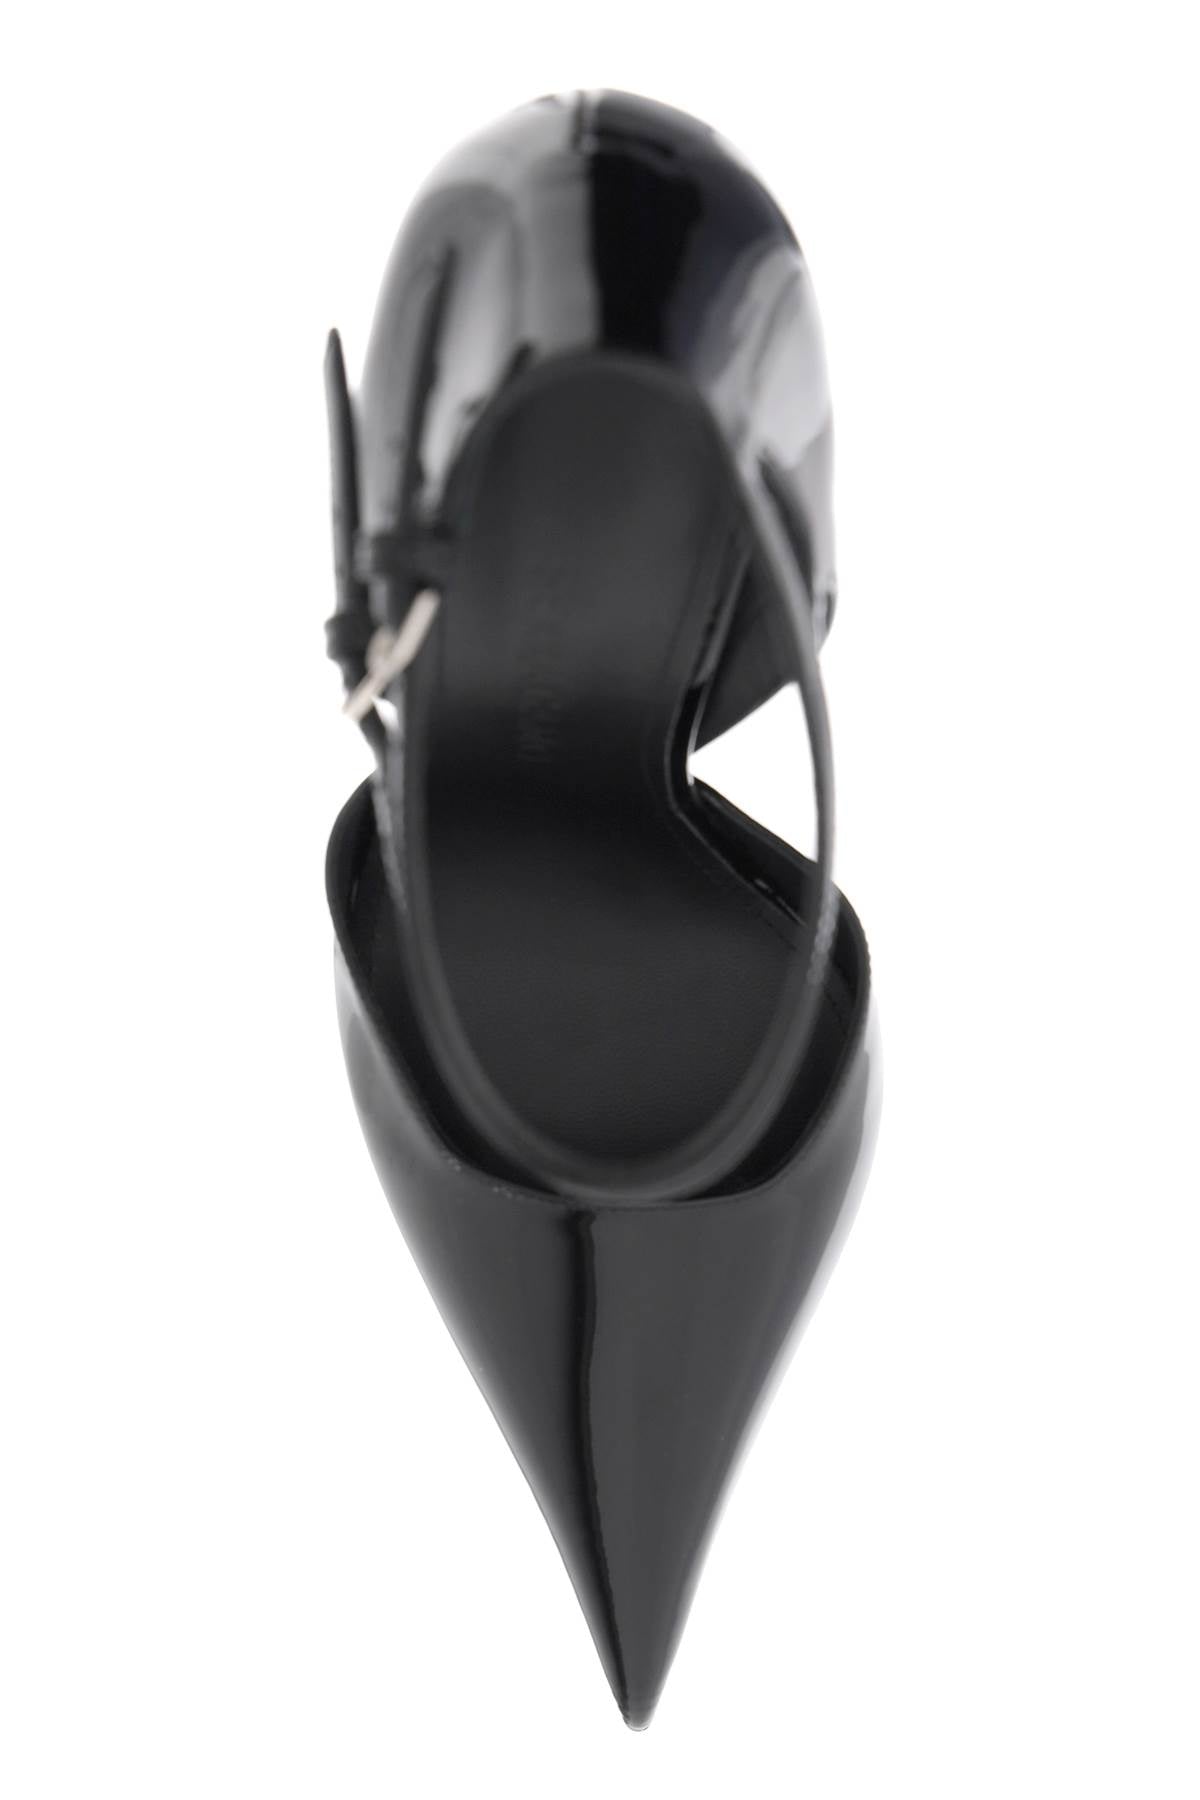 Shop Ferragamo Sophisticated Black Patent Leather Sandals For Women With Adjustable Straps And Contoured Heels